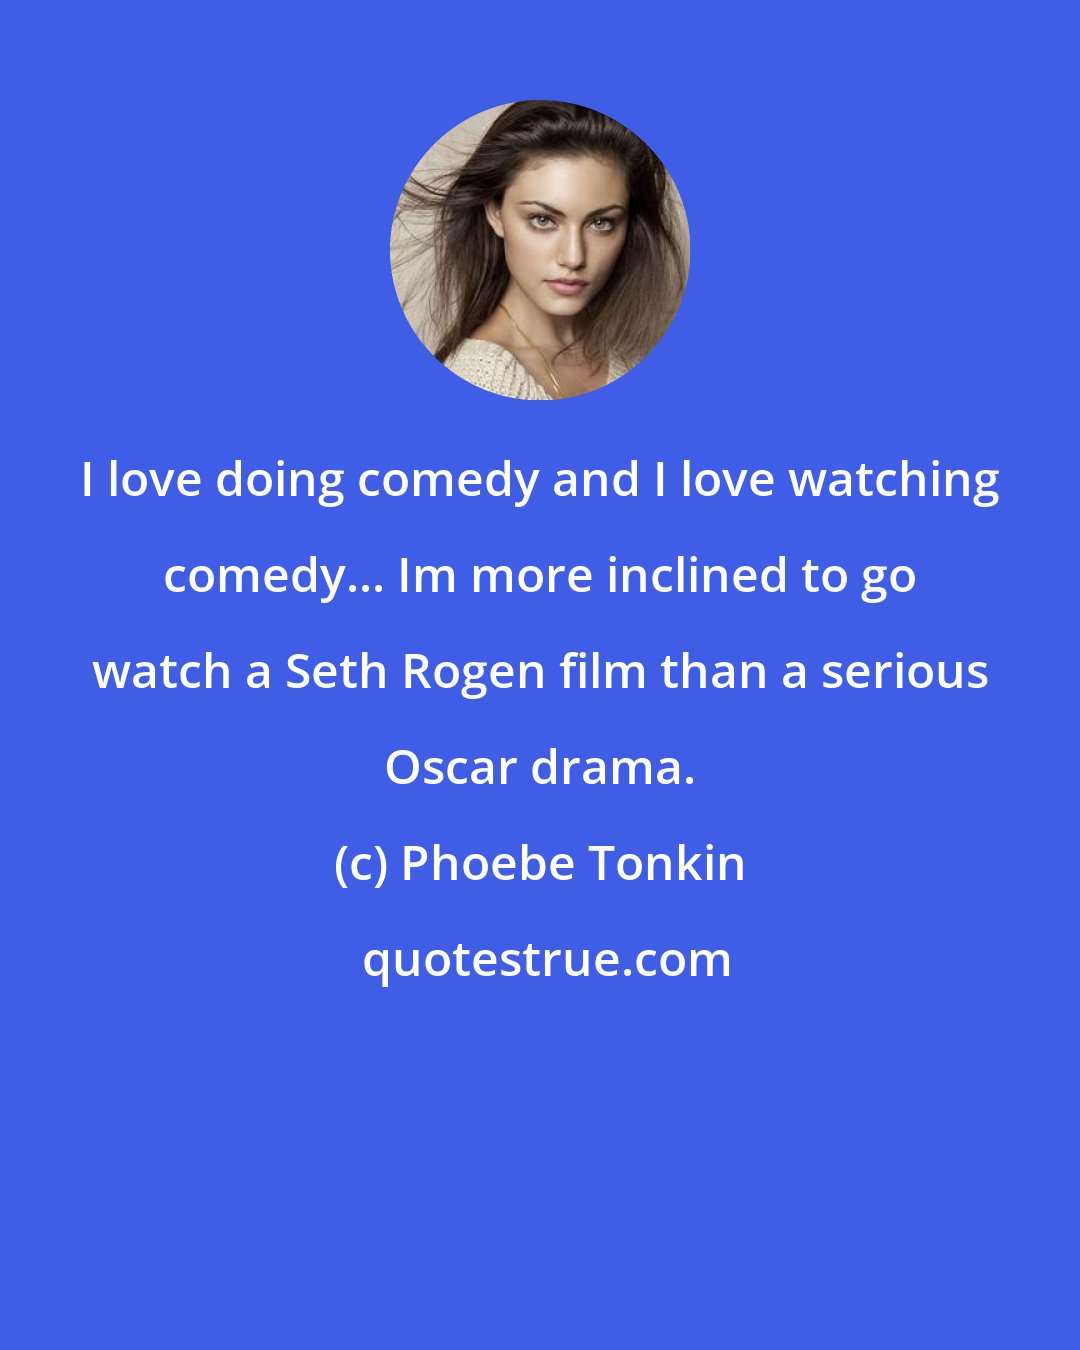 Phoebe Tonkin: I love doing comedy and I love watching comedy... Im more inclined to go watch a Seth Rogen film than a serious Oscar drama.